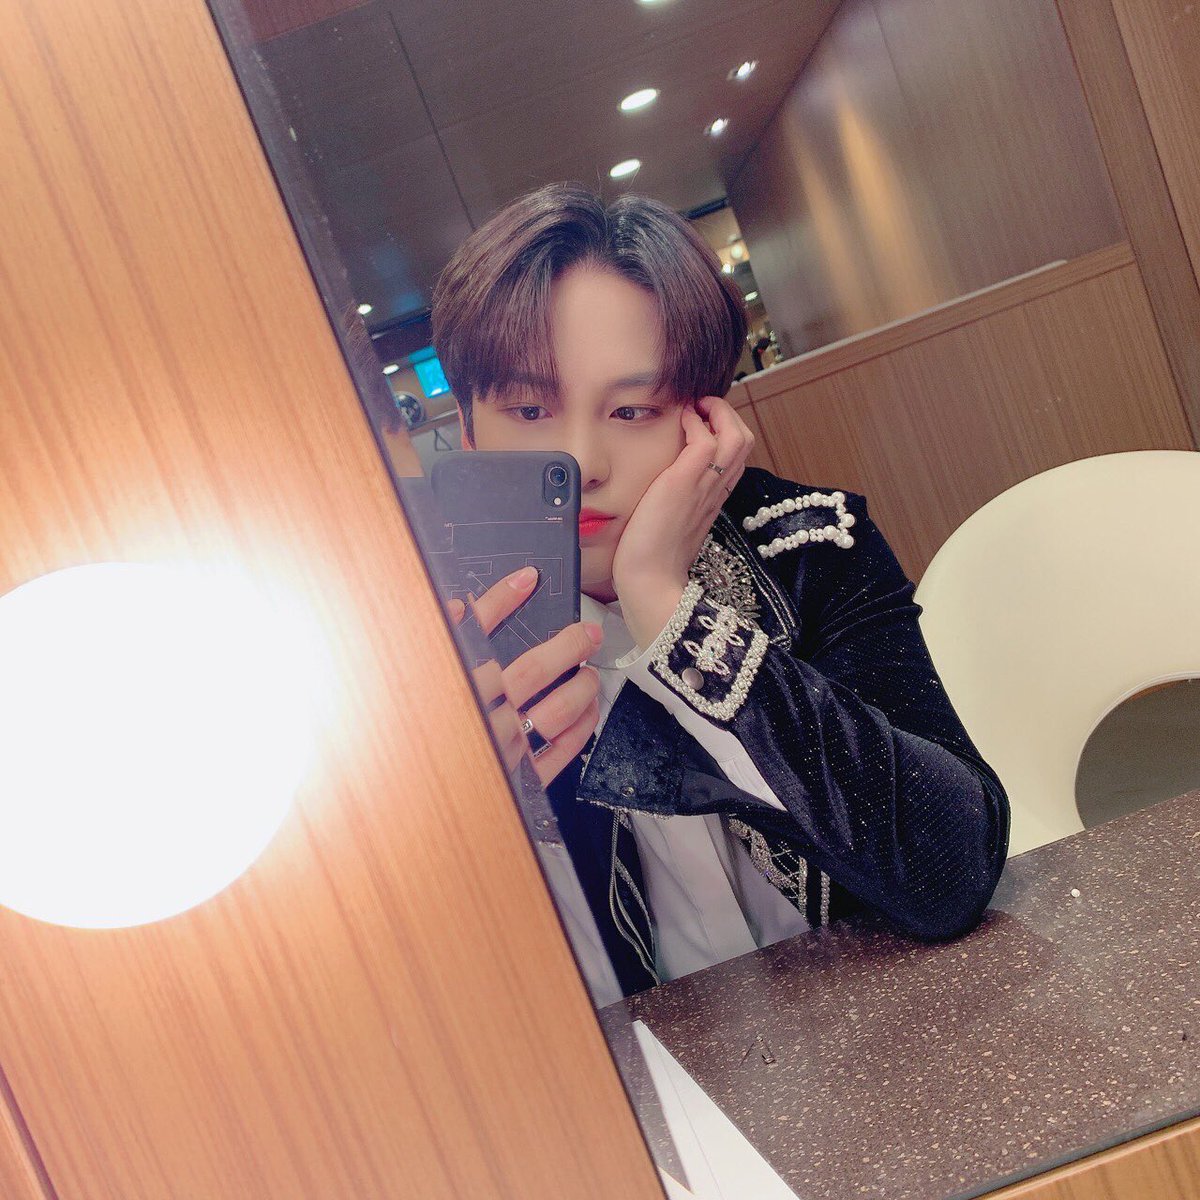 He looks like a prince + is this even considered a mirror selfie lmao